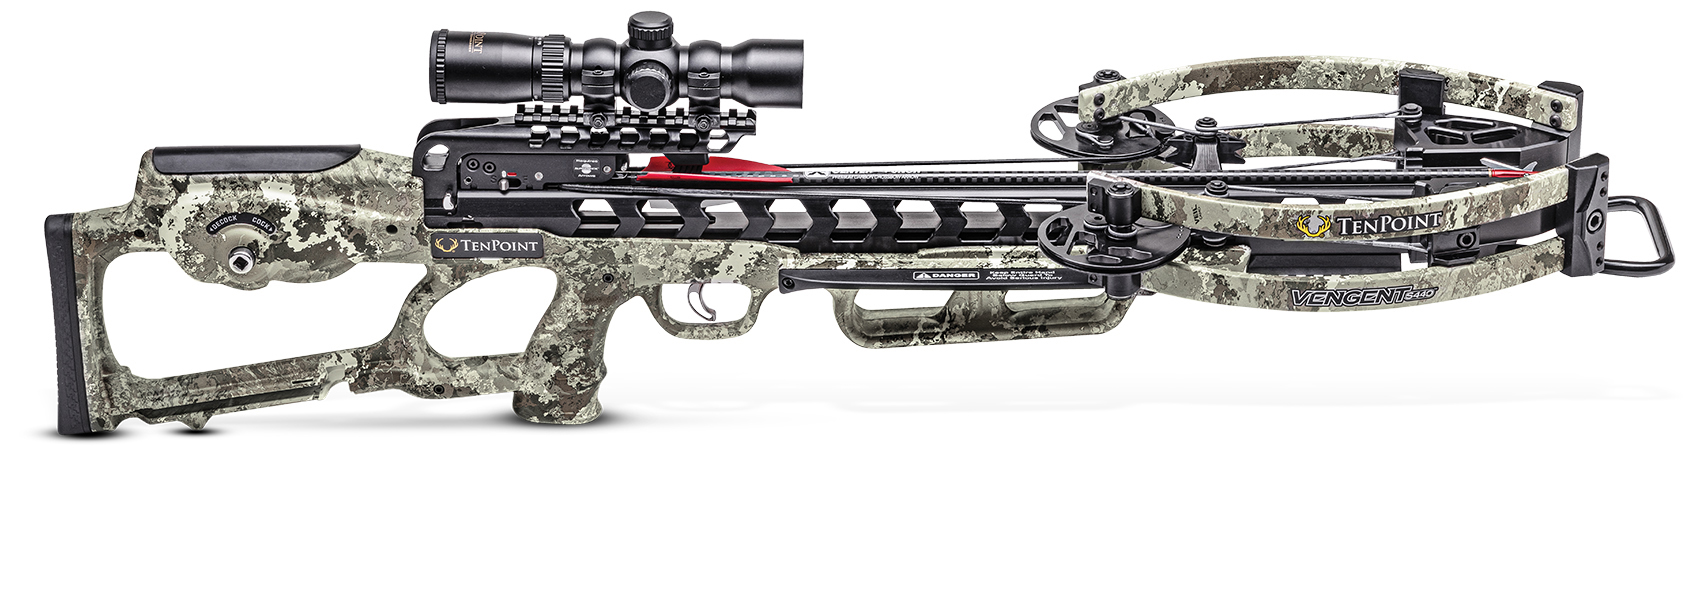 Side-Profile Image of TenPoint Vengent S440 crossbow.